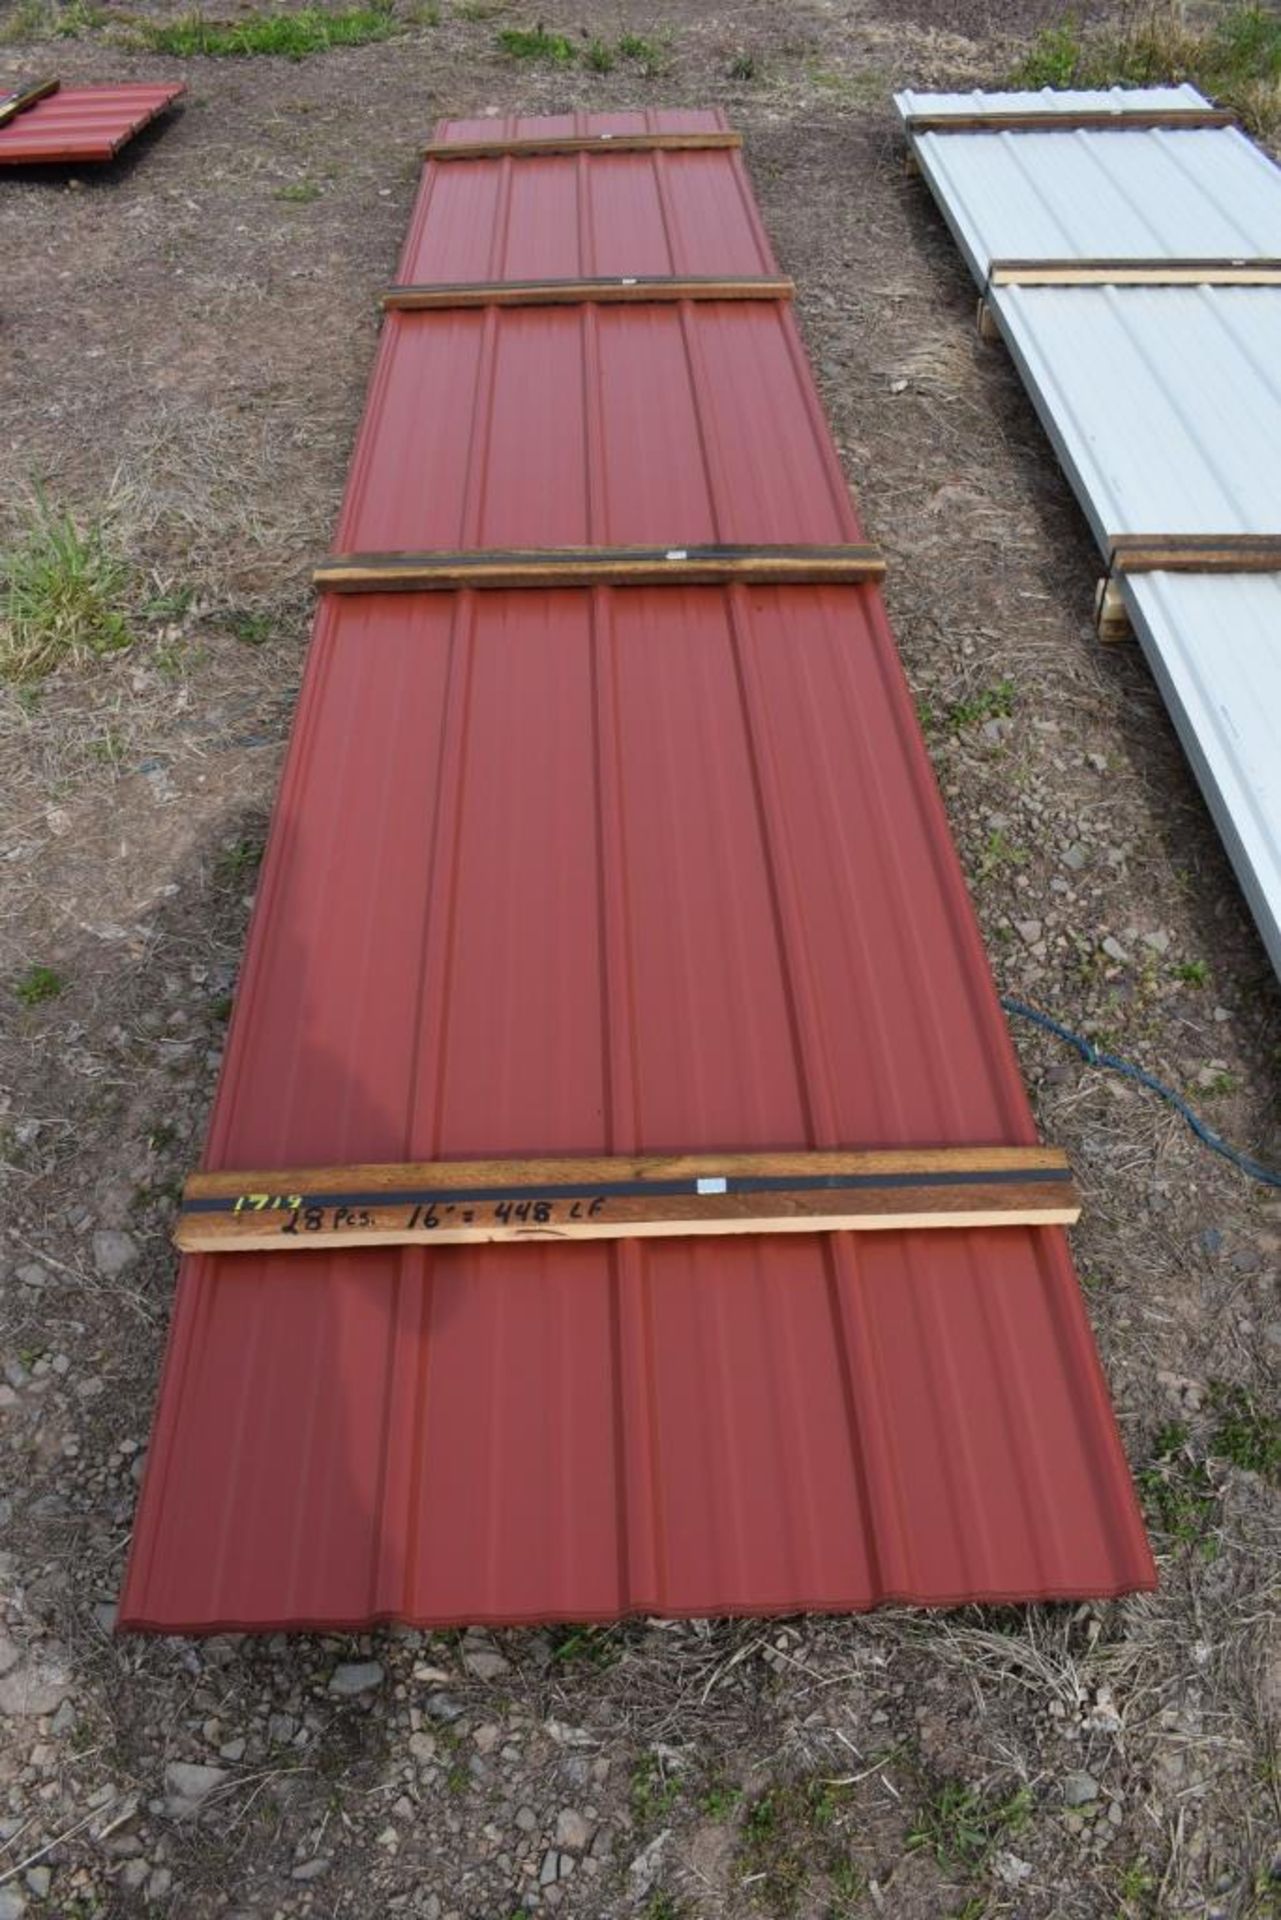 28 Pieces of 16' Sections of Red Corrugated Metal Paneling SOLD TIMES THE LINEAR FOOT